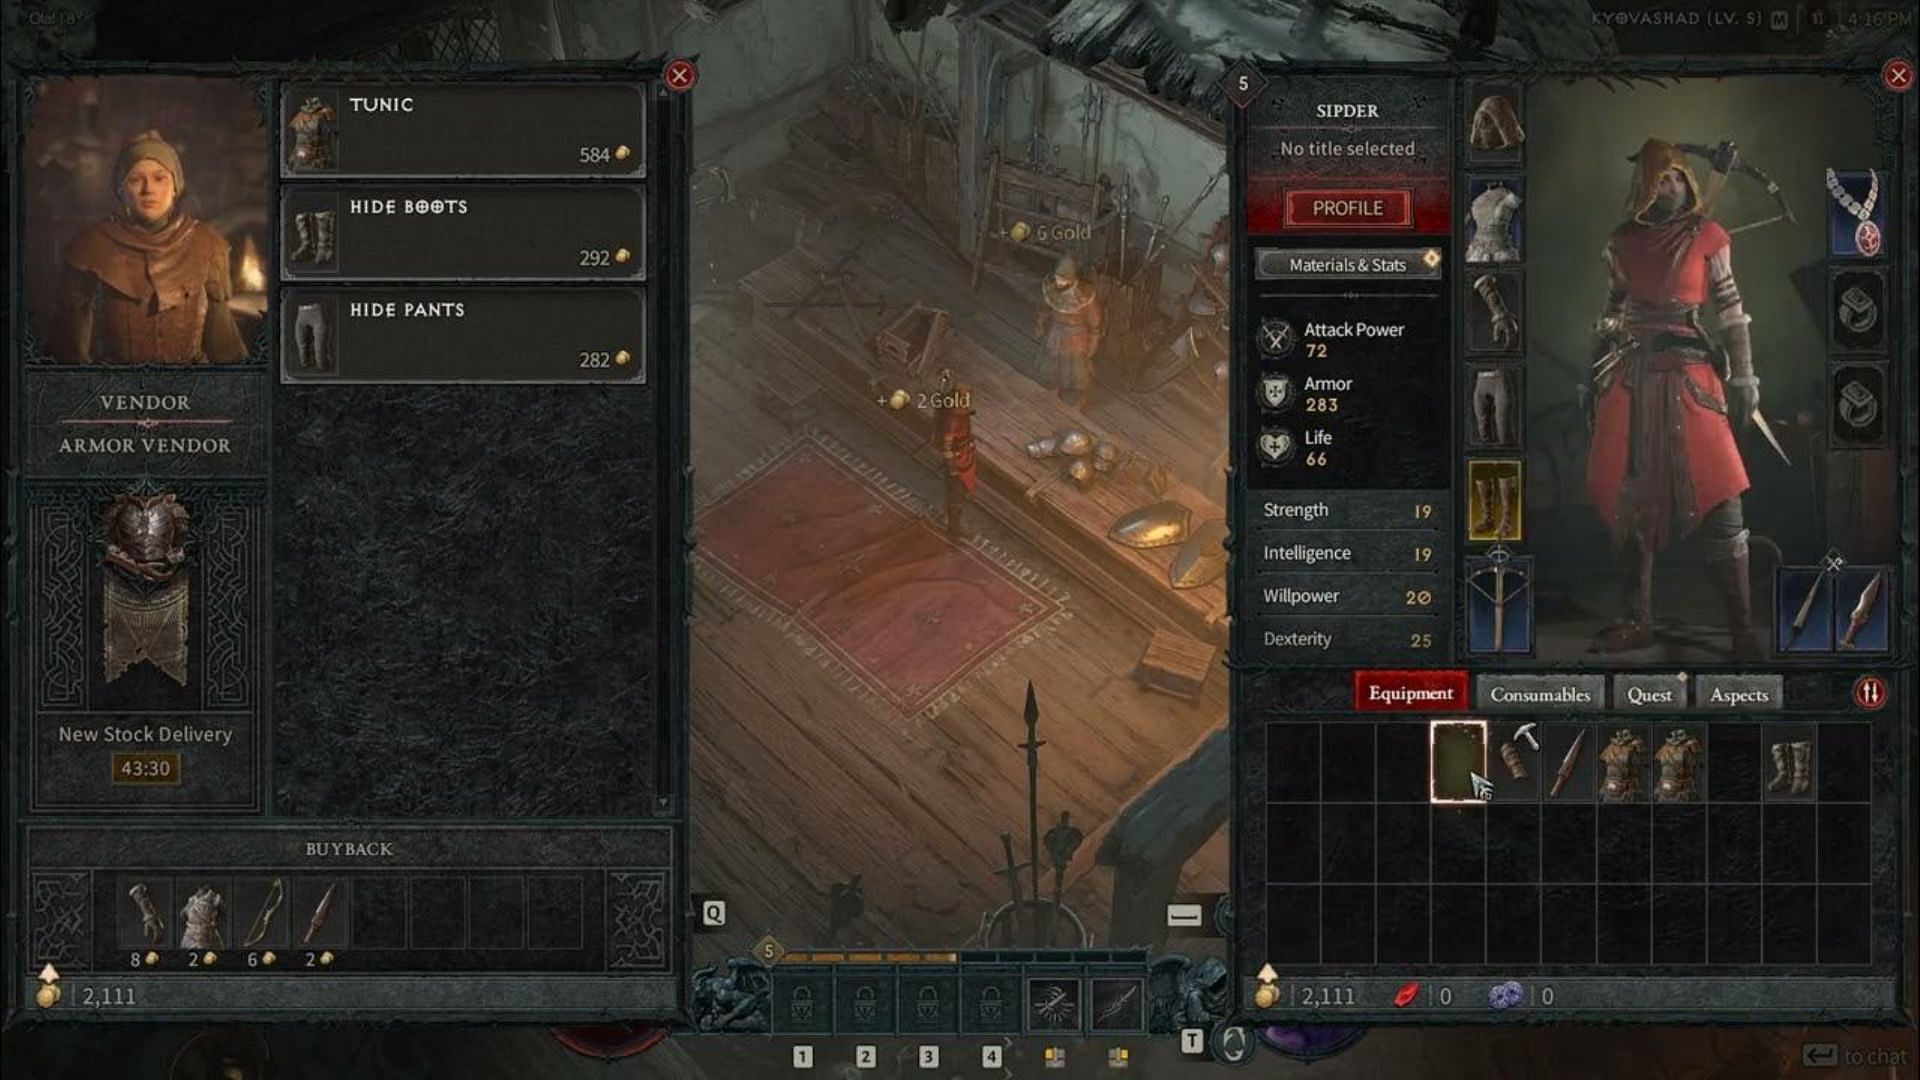 One of the most important features of Diablo 4 is salvaging gear.